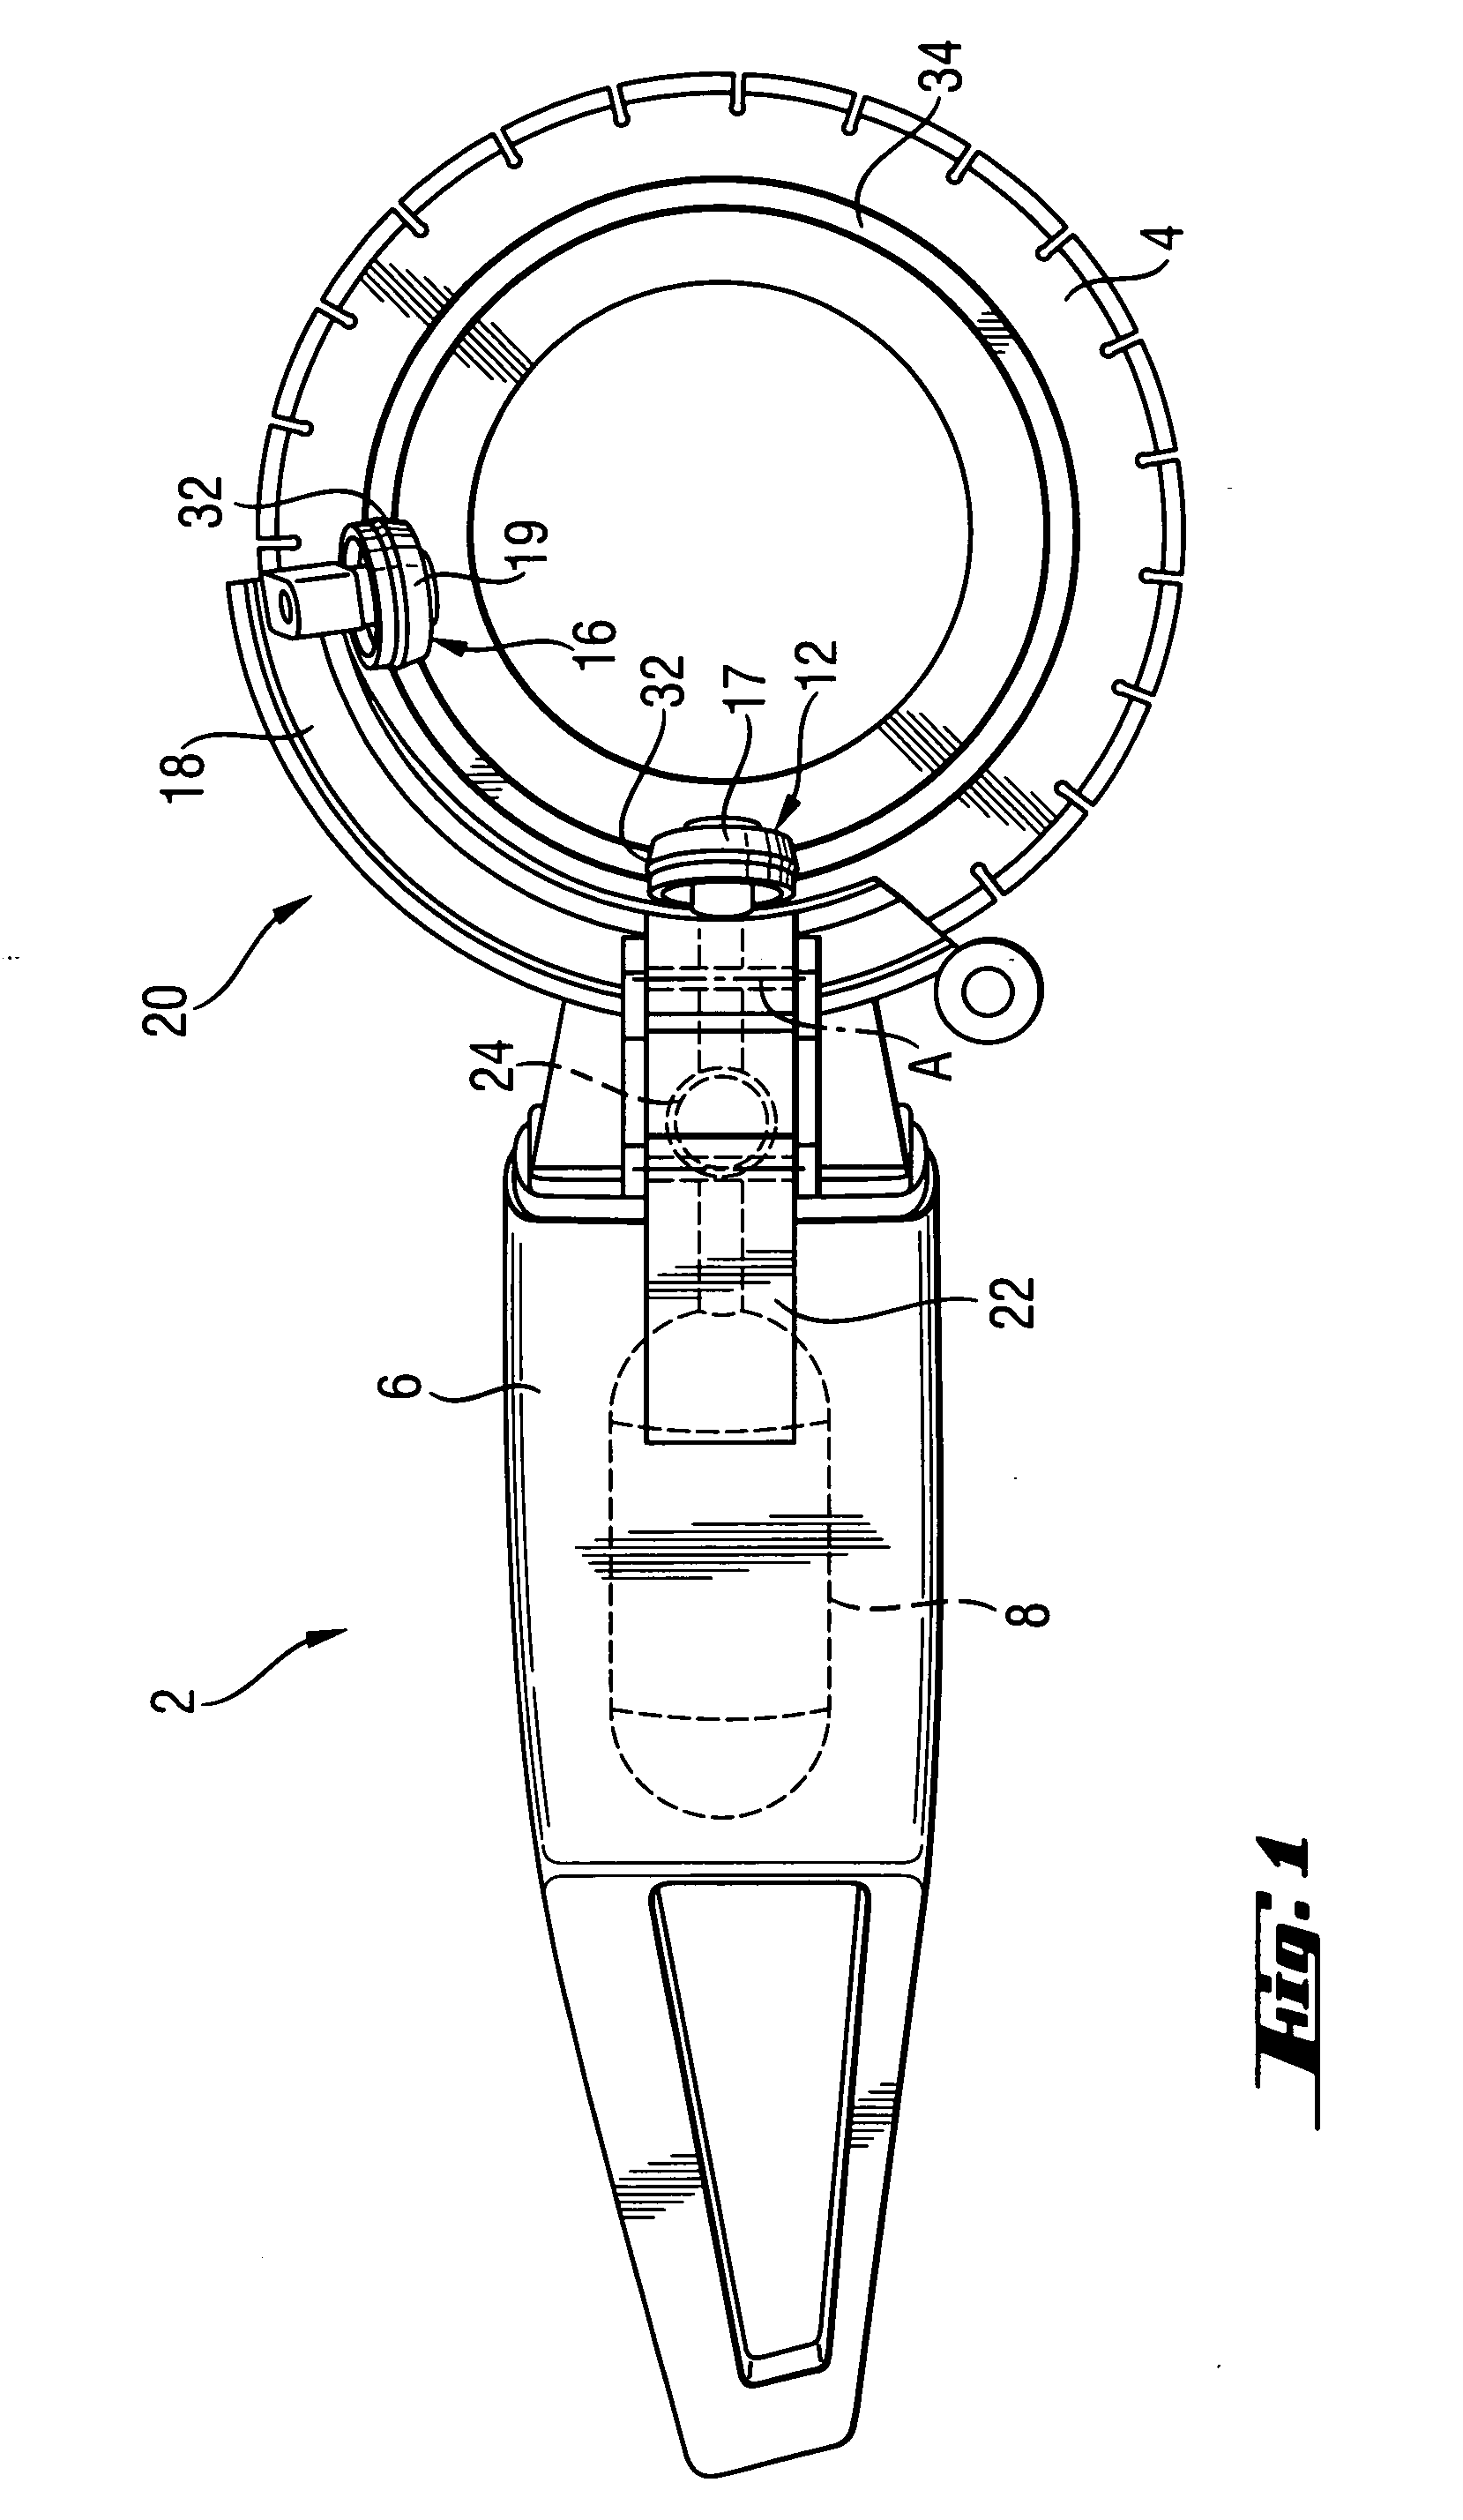 Power tool with an eccentrically driven working tool